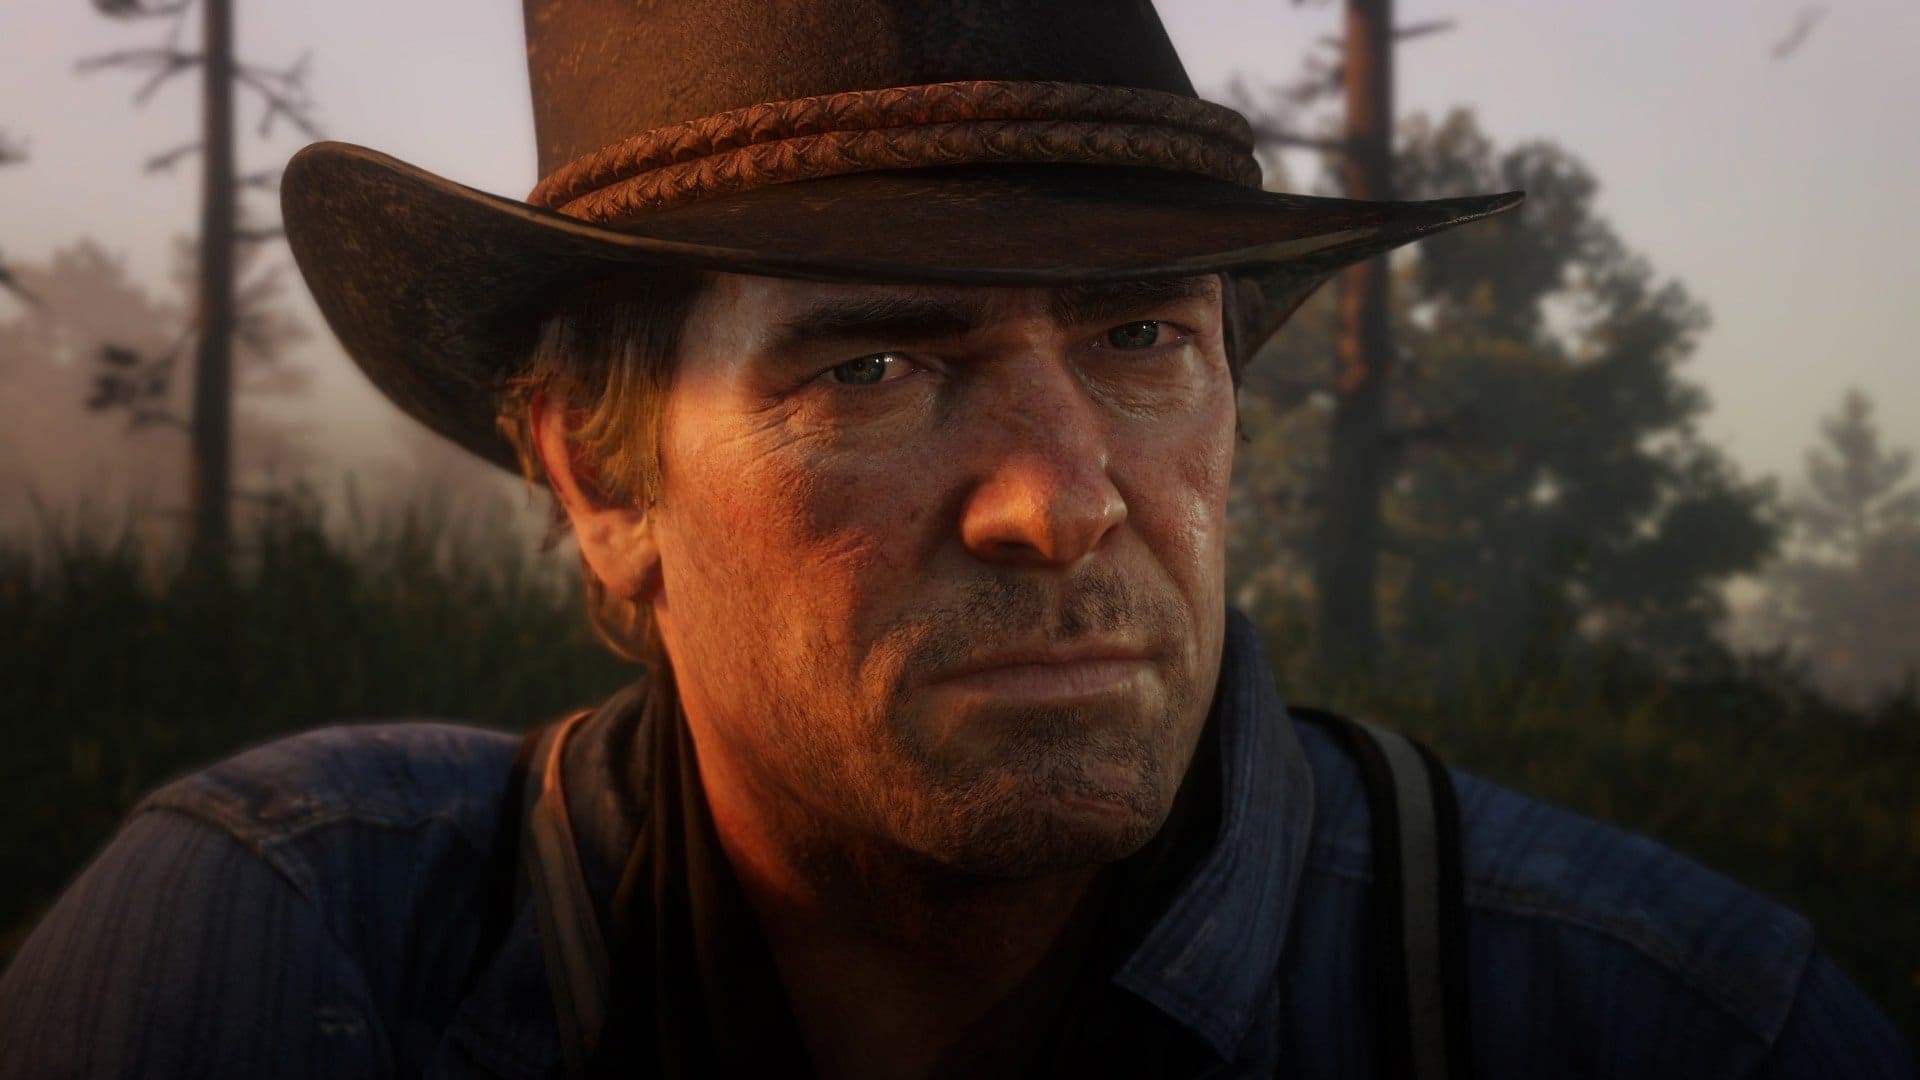 Emotional performances like Arthur Morgan in Red Dead Redemption 2 can't be replicated by AI. Image credit: Rockstar Games